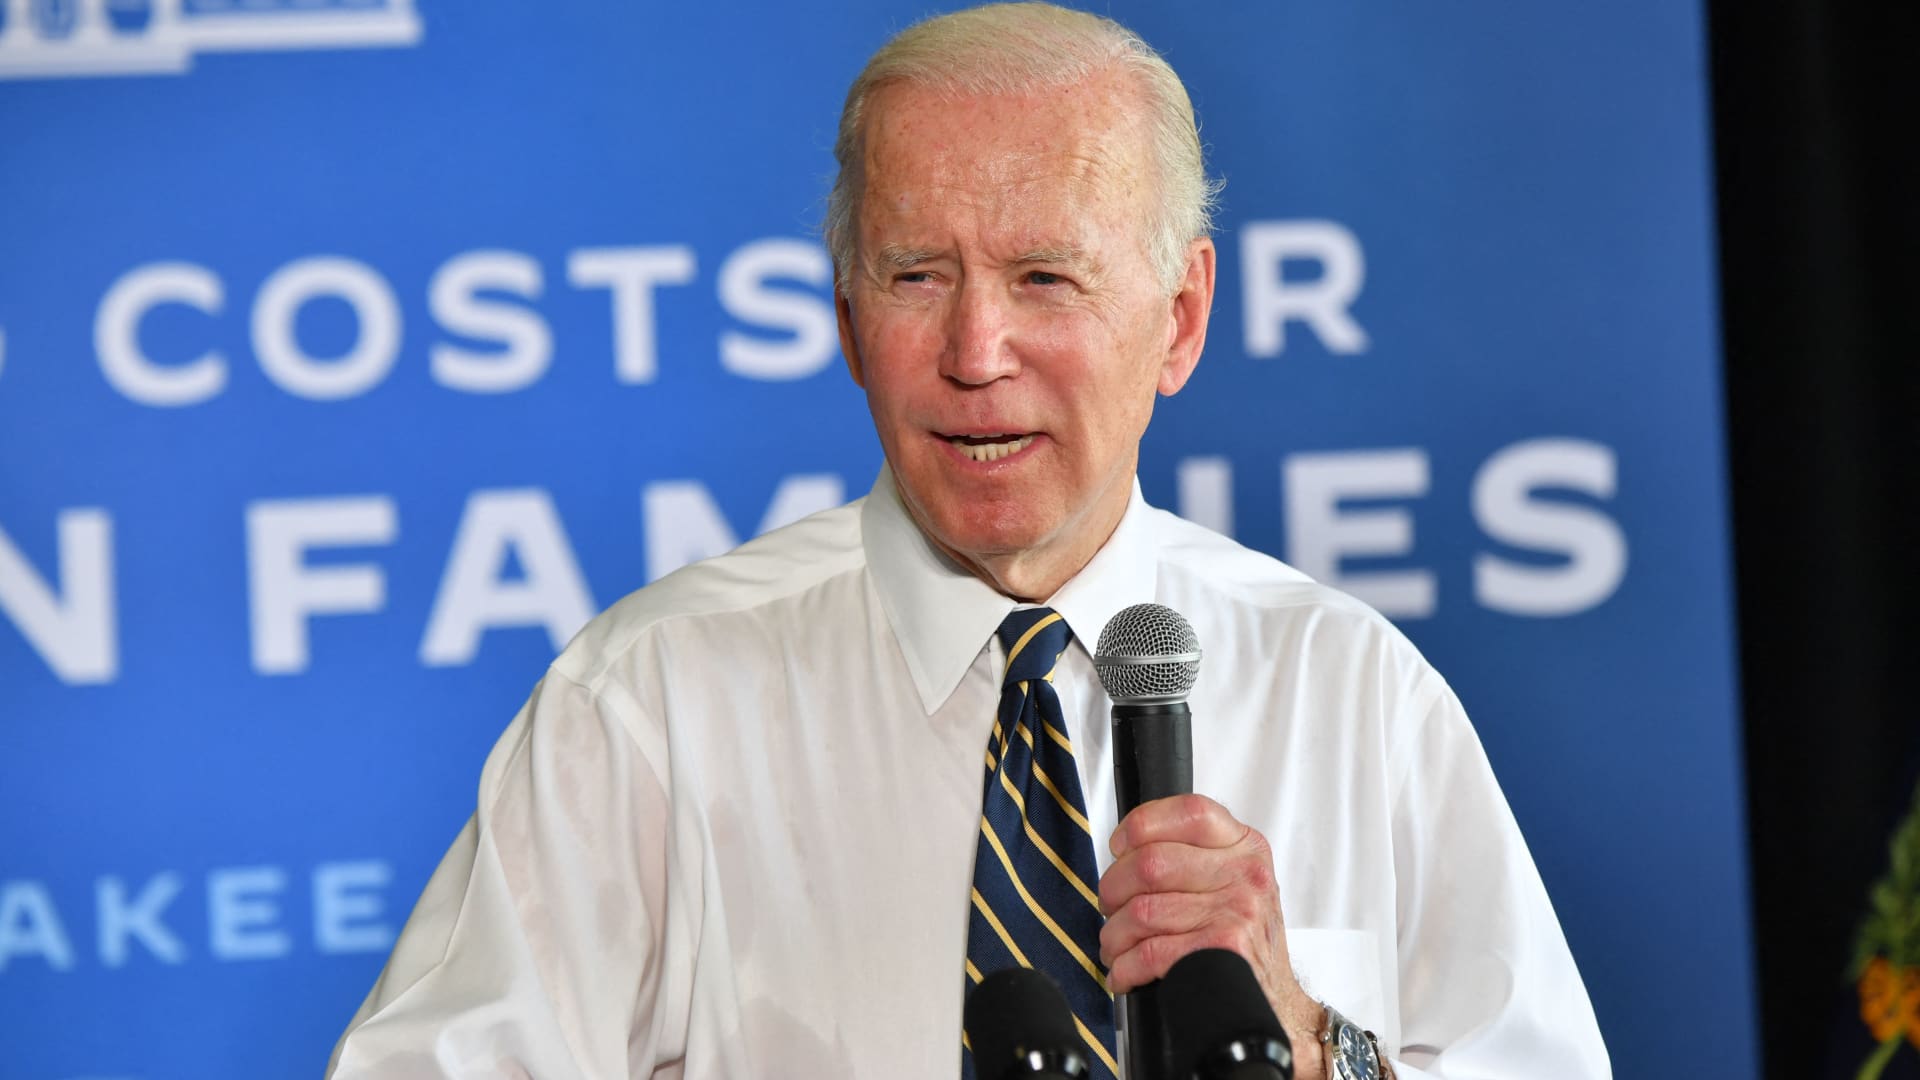 Biden outlines plan to boost U.S. agriculture production as Ukraine invasion fuels high food prices